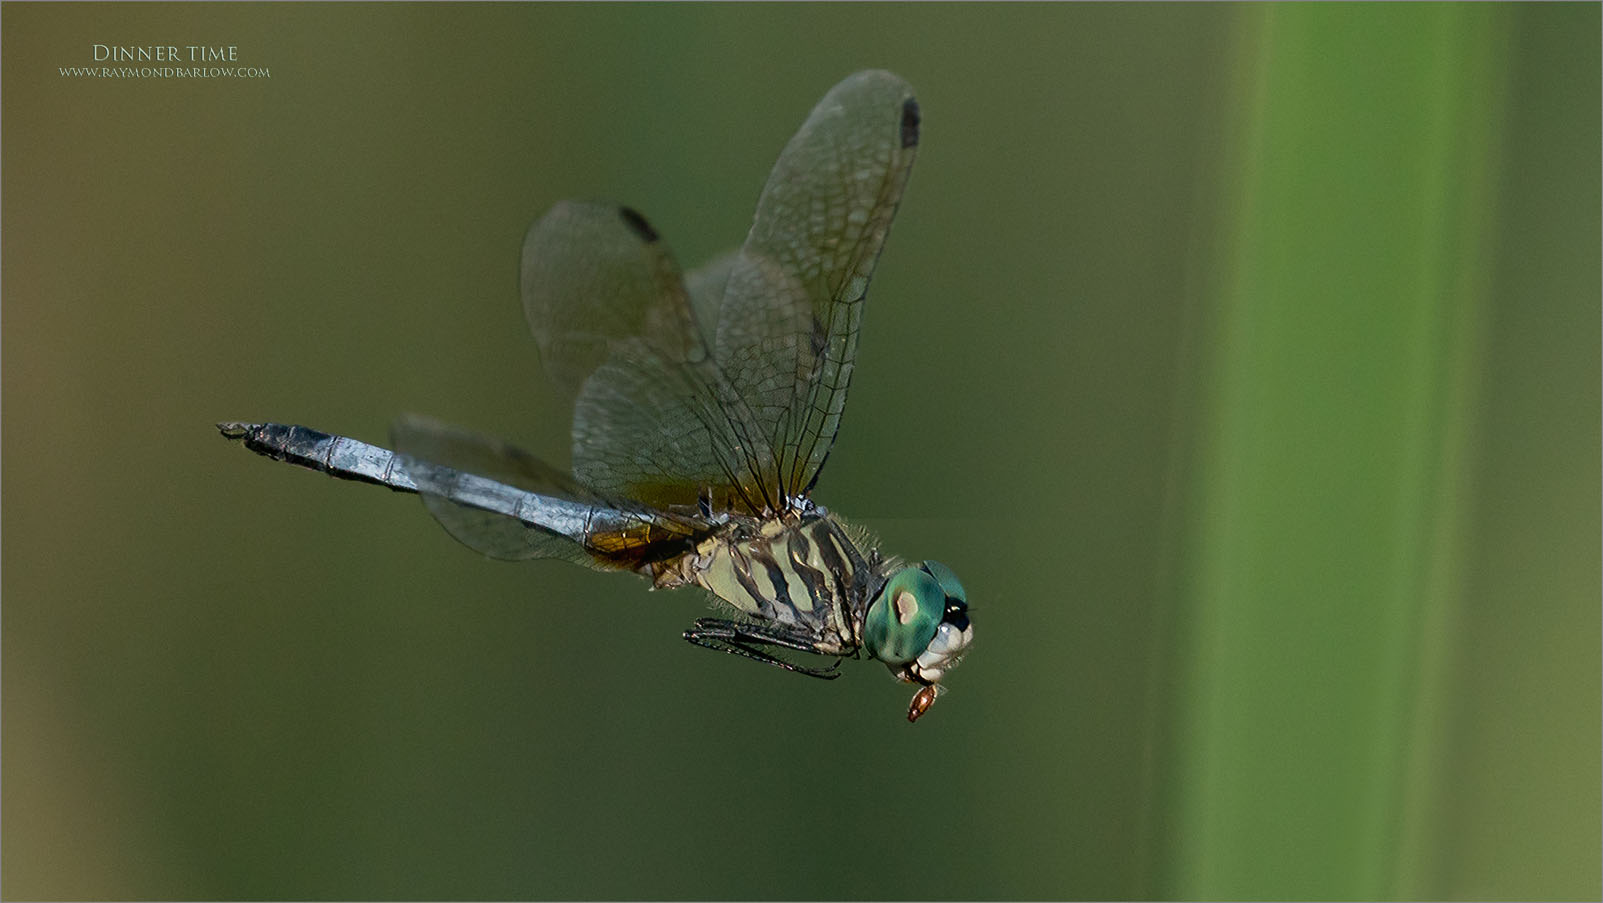 A9_07397 Blue Dasher dragonfly with Dinner 2 1600 share   .jpg